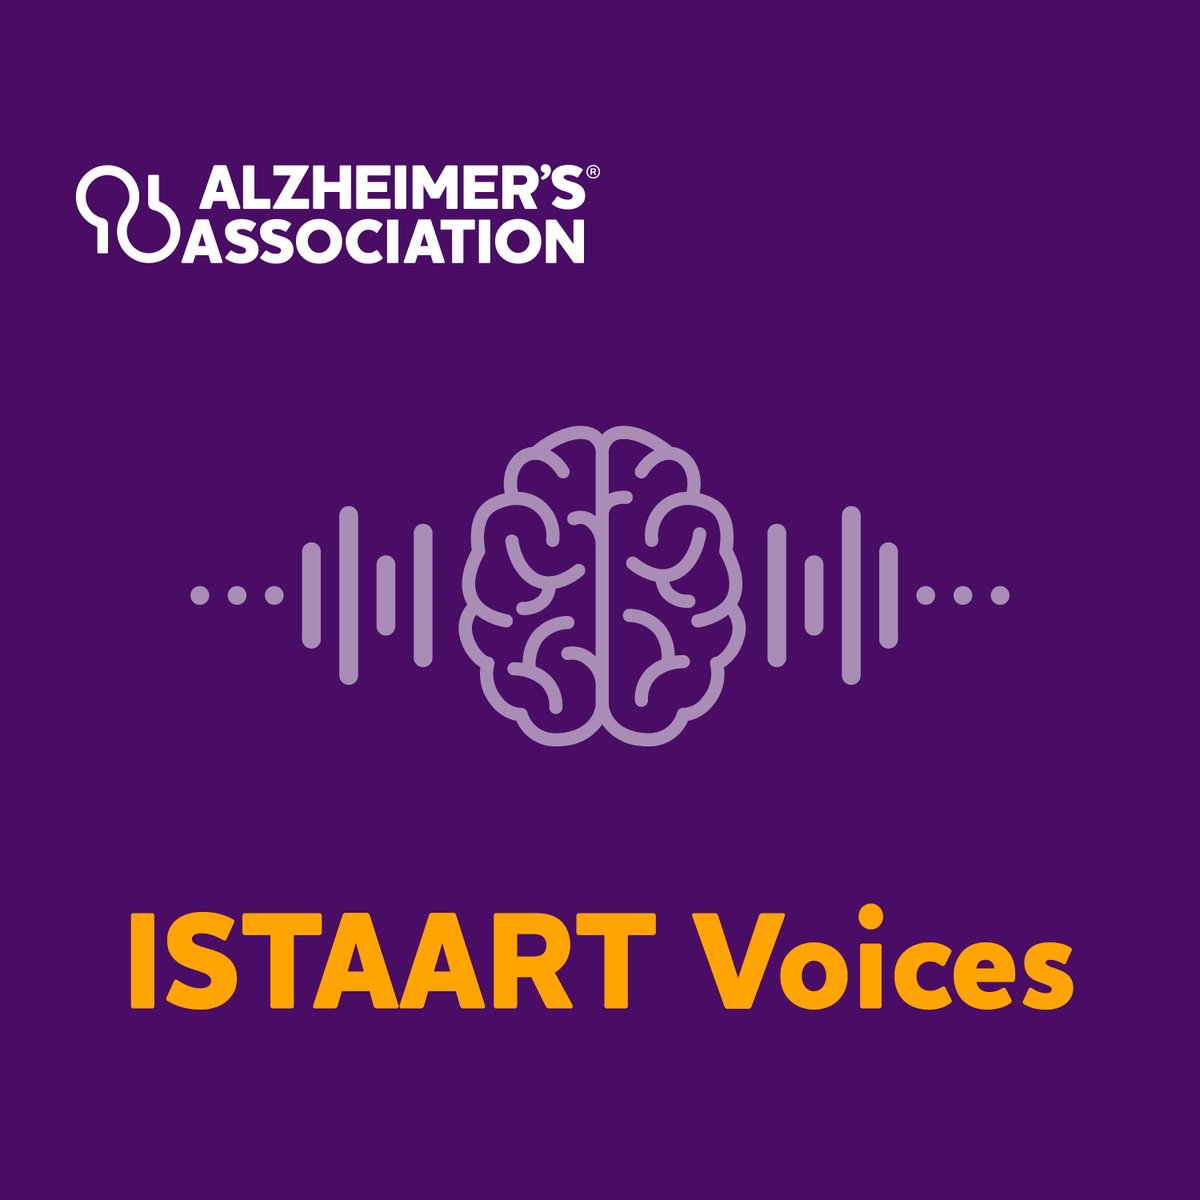 Introducing @ISTAART Voices, a podcast that explores the latest dementia research through conversation with study authors from the @alzdemjournals family. Start listening today: alz.org/ISTAARTpodcast